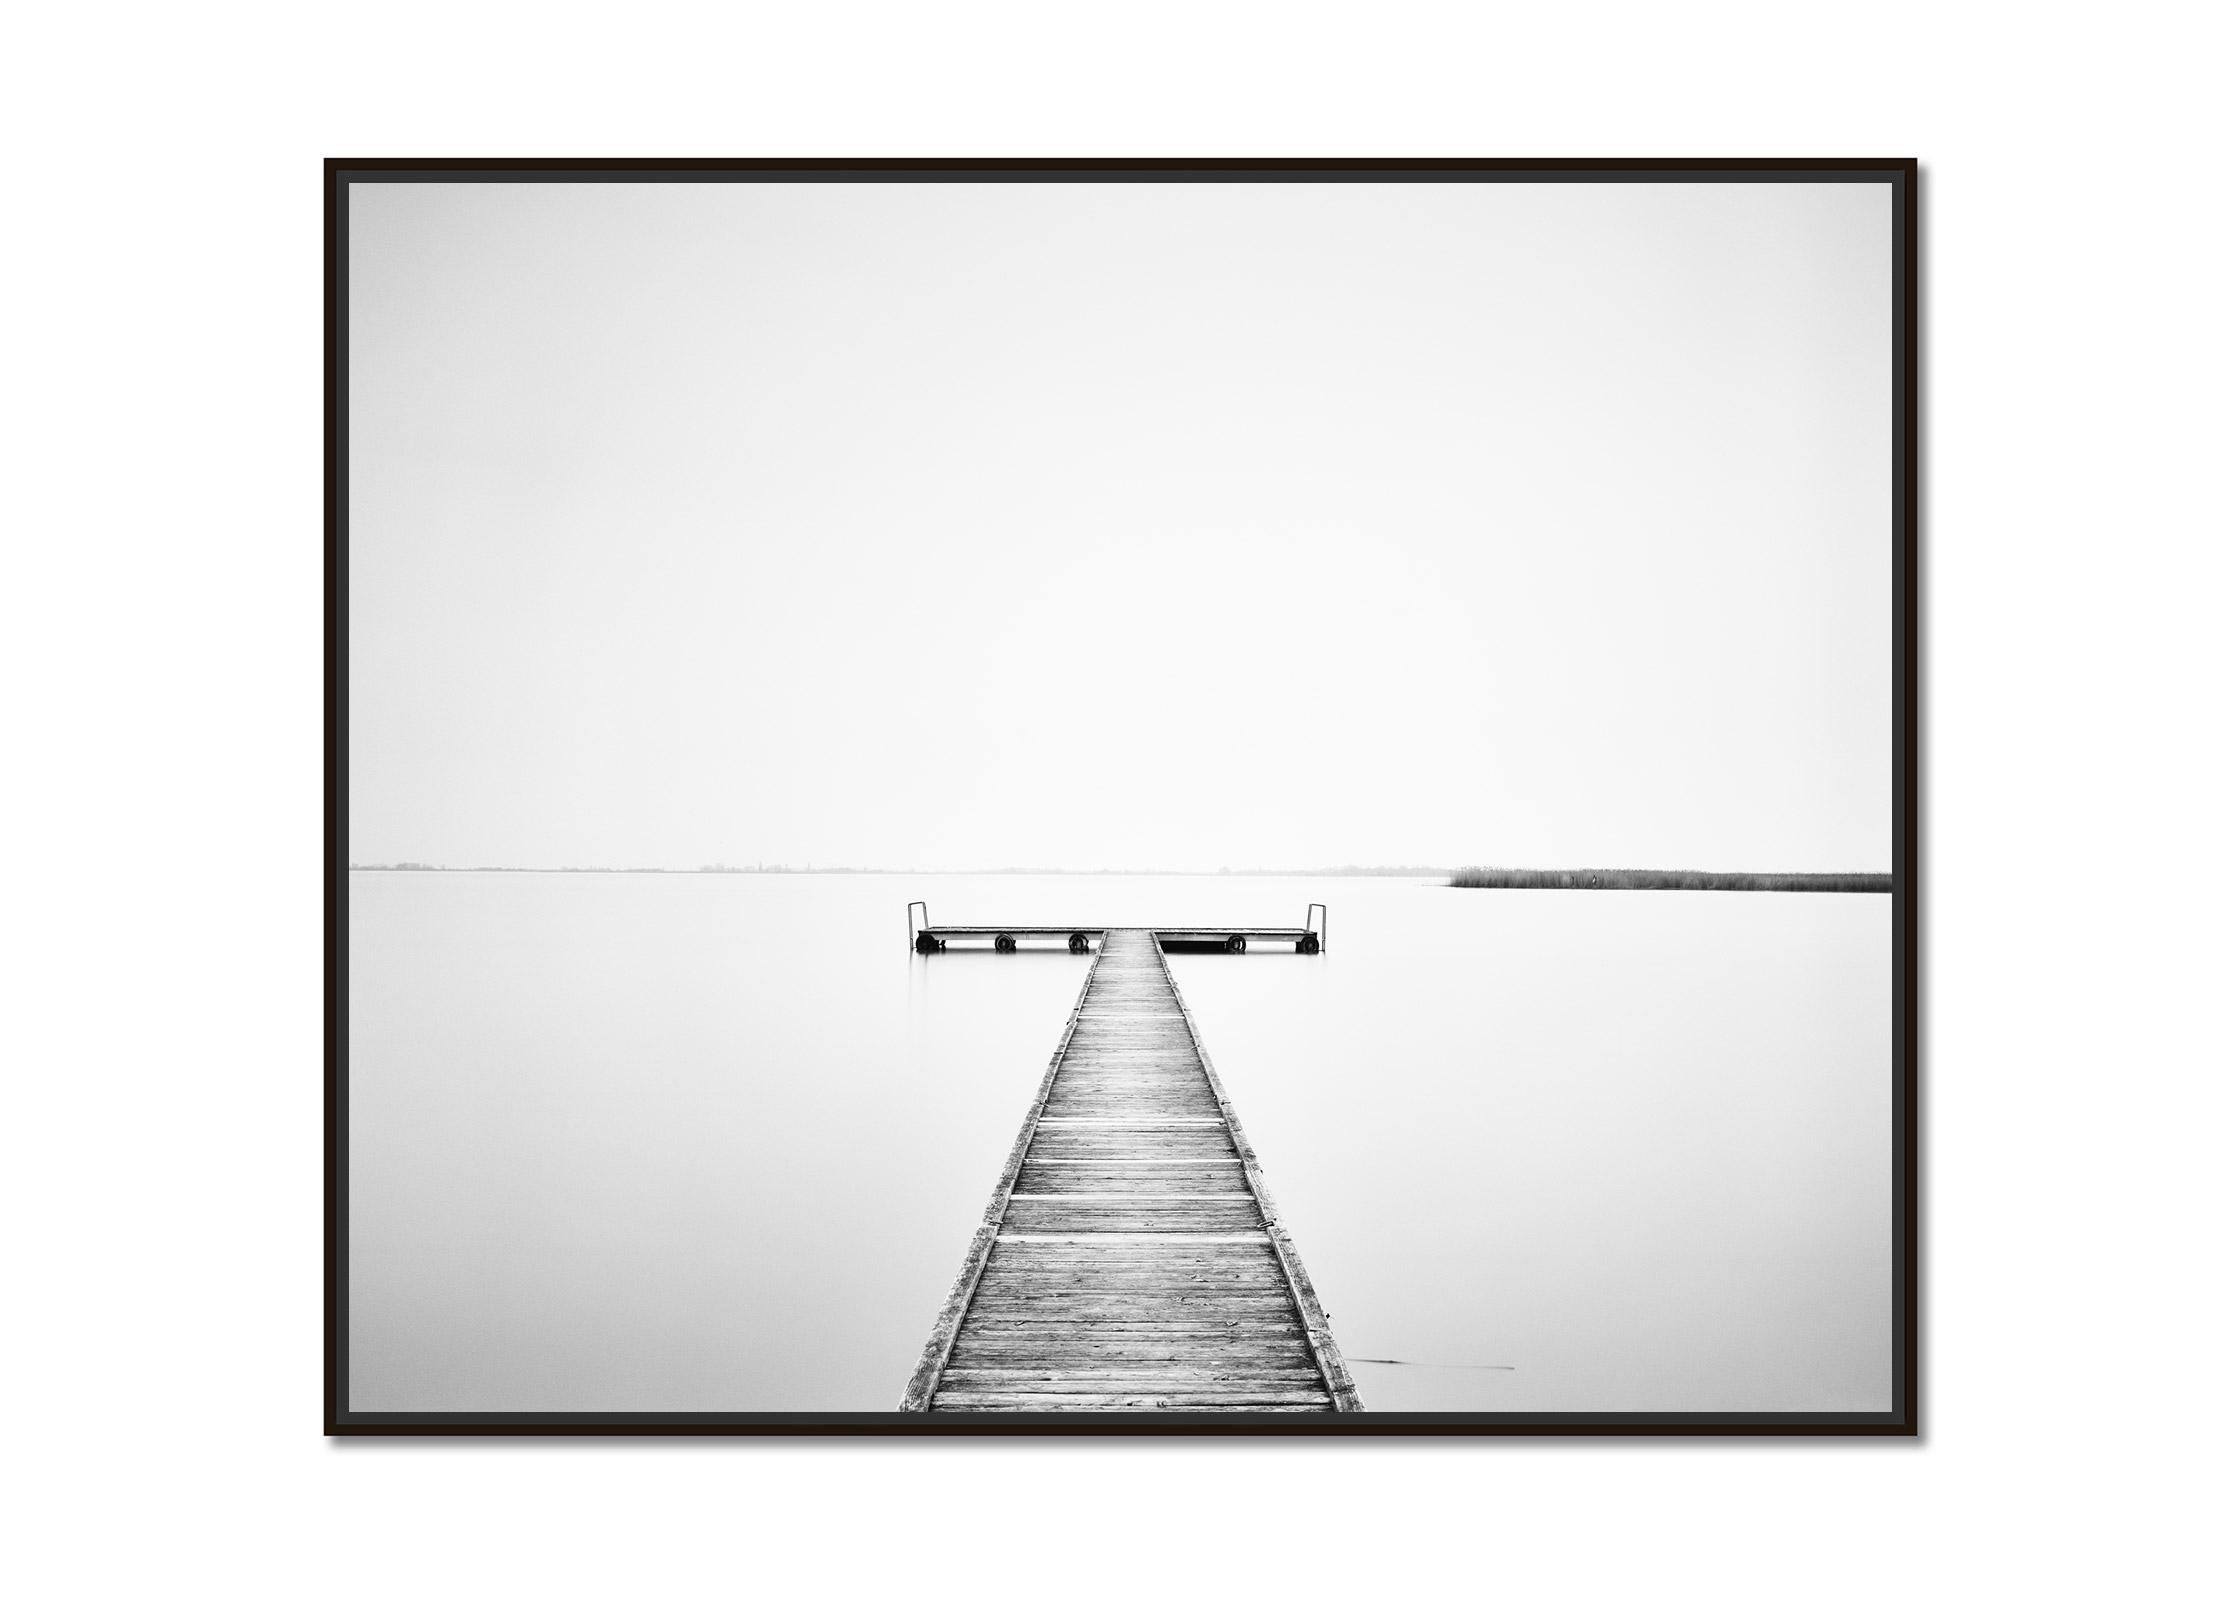 Wood Pier, sunny morning, limited edition black and white photography, watescape - Photograph by Gerald Berghammer